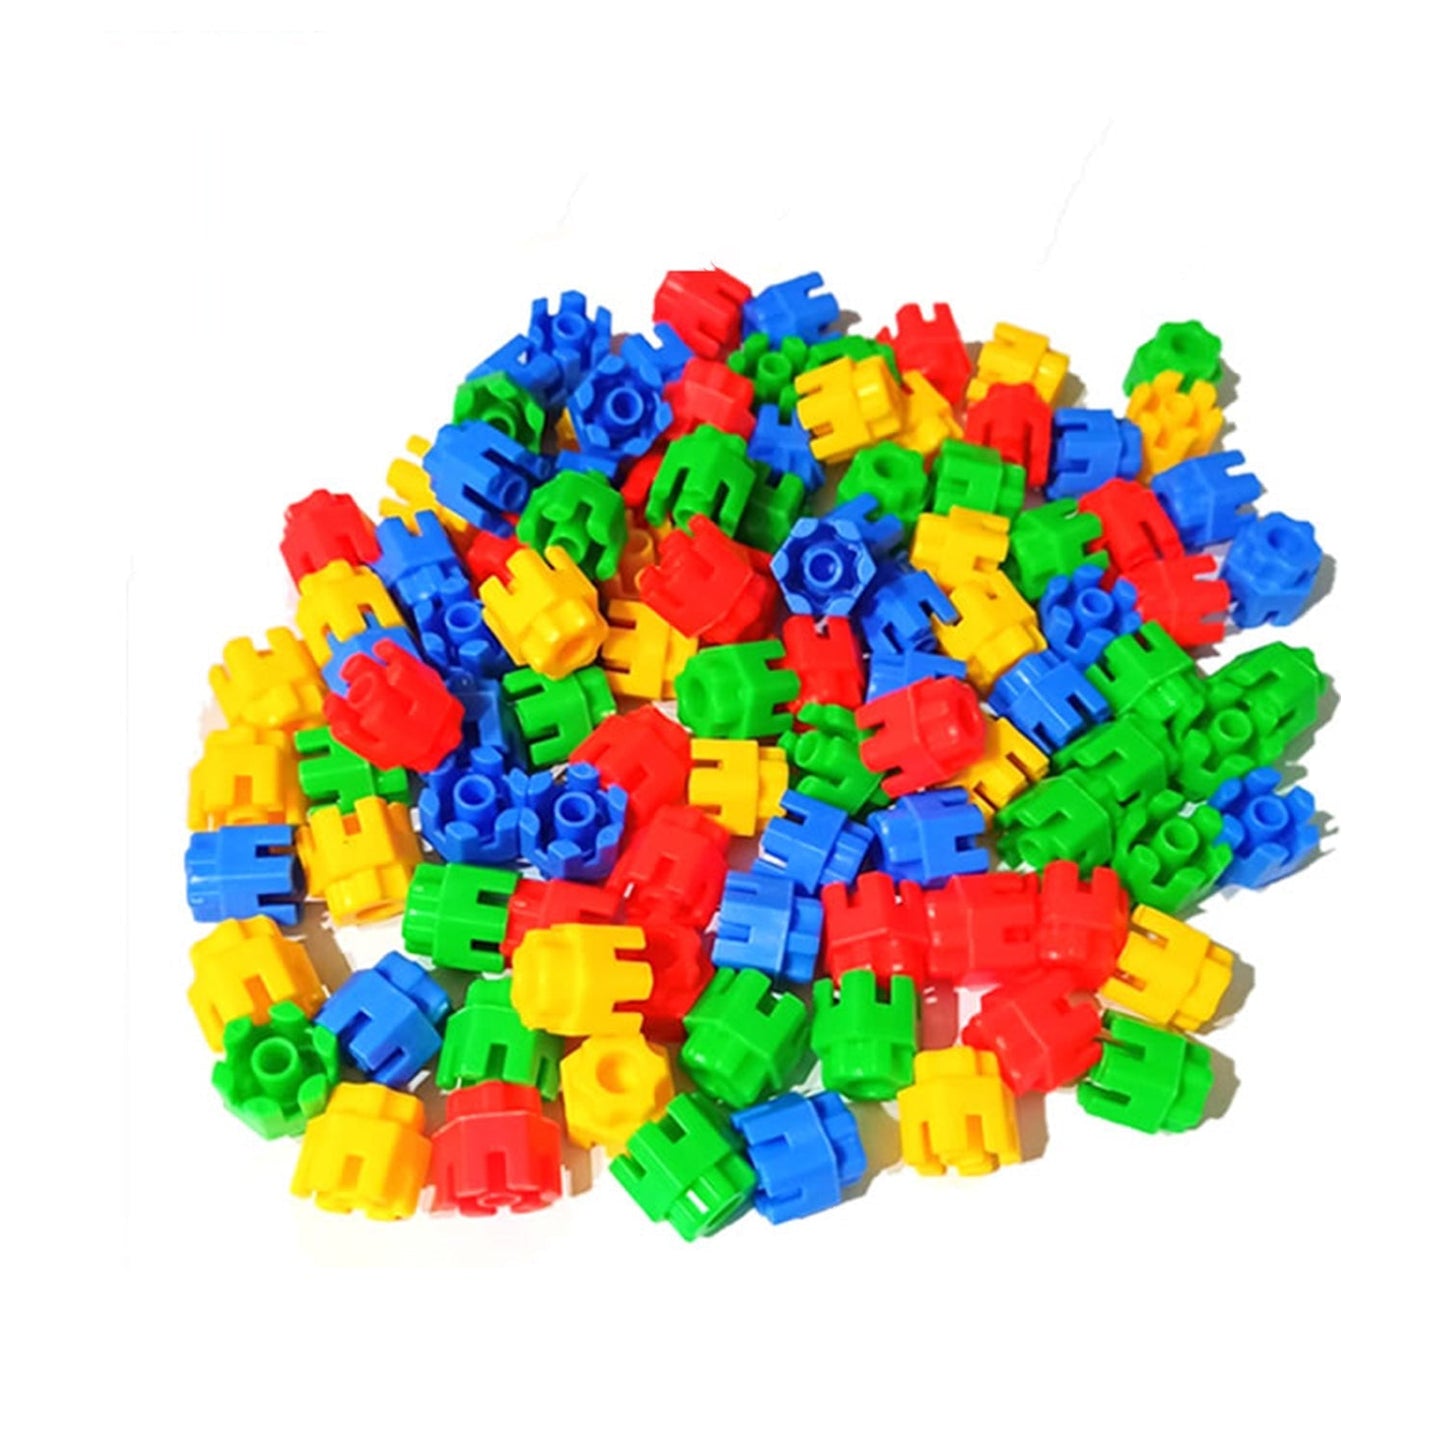 3909 240 Pc Hexa Blocks Toy used in all kinds of household and official places specially for kids and children for their playing and enjoying purposes. DeoDap